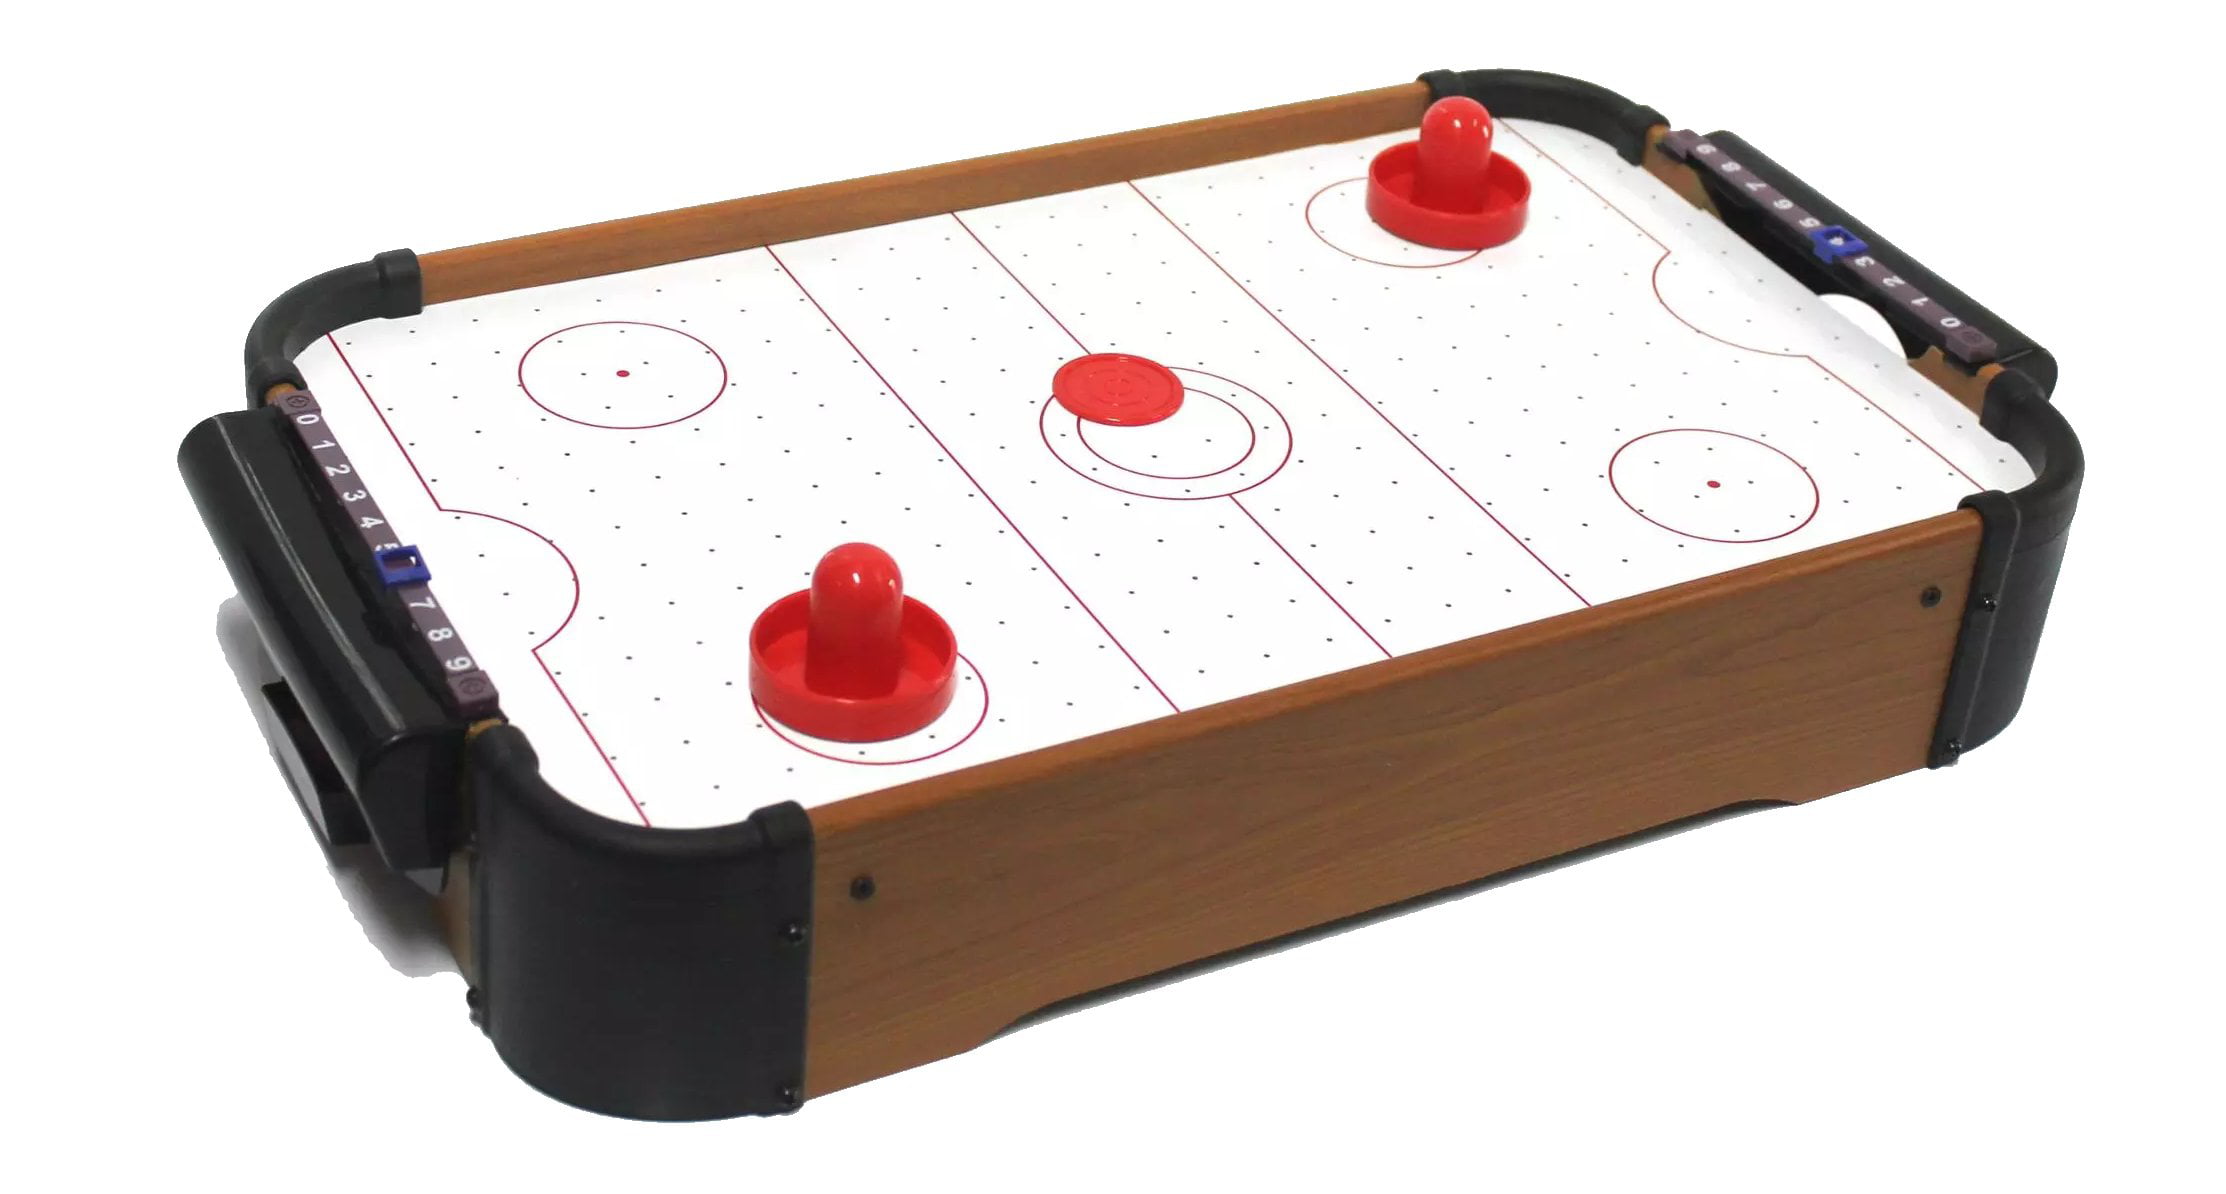 MINI Air Hockey Table Top Electric Air Hockey Game Table Top Set - Battery Operated - 20 Inch Table Top Hockey Game.&hellip;